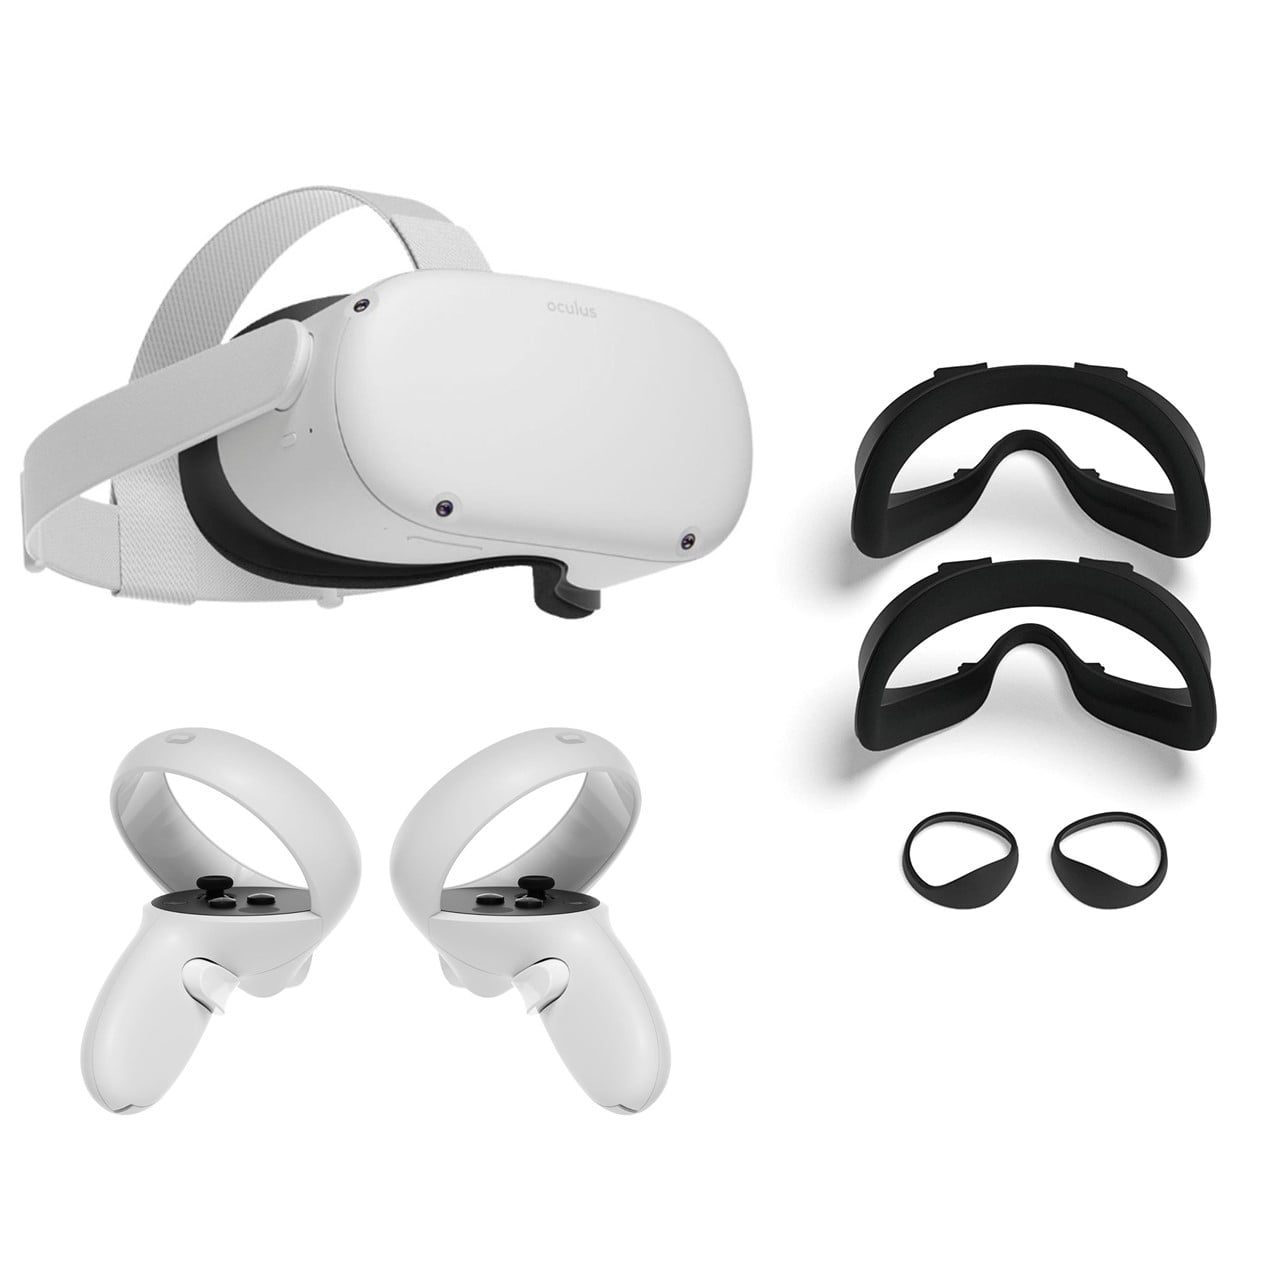 Oculus Newest Quest 2 VR Headset 128GB Holiday Set - Advanced All-in-One  Virtual Reality Headset Cover Set, White